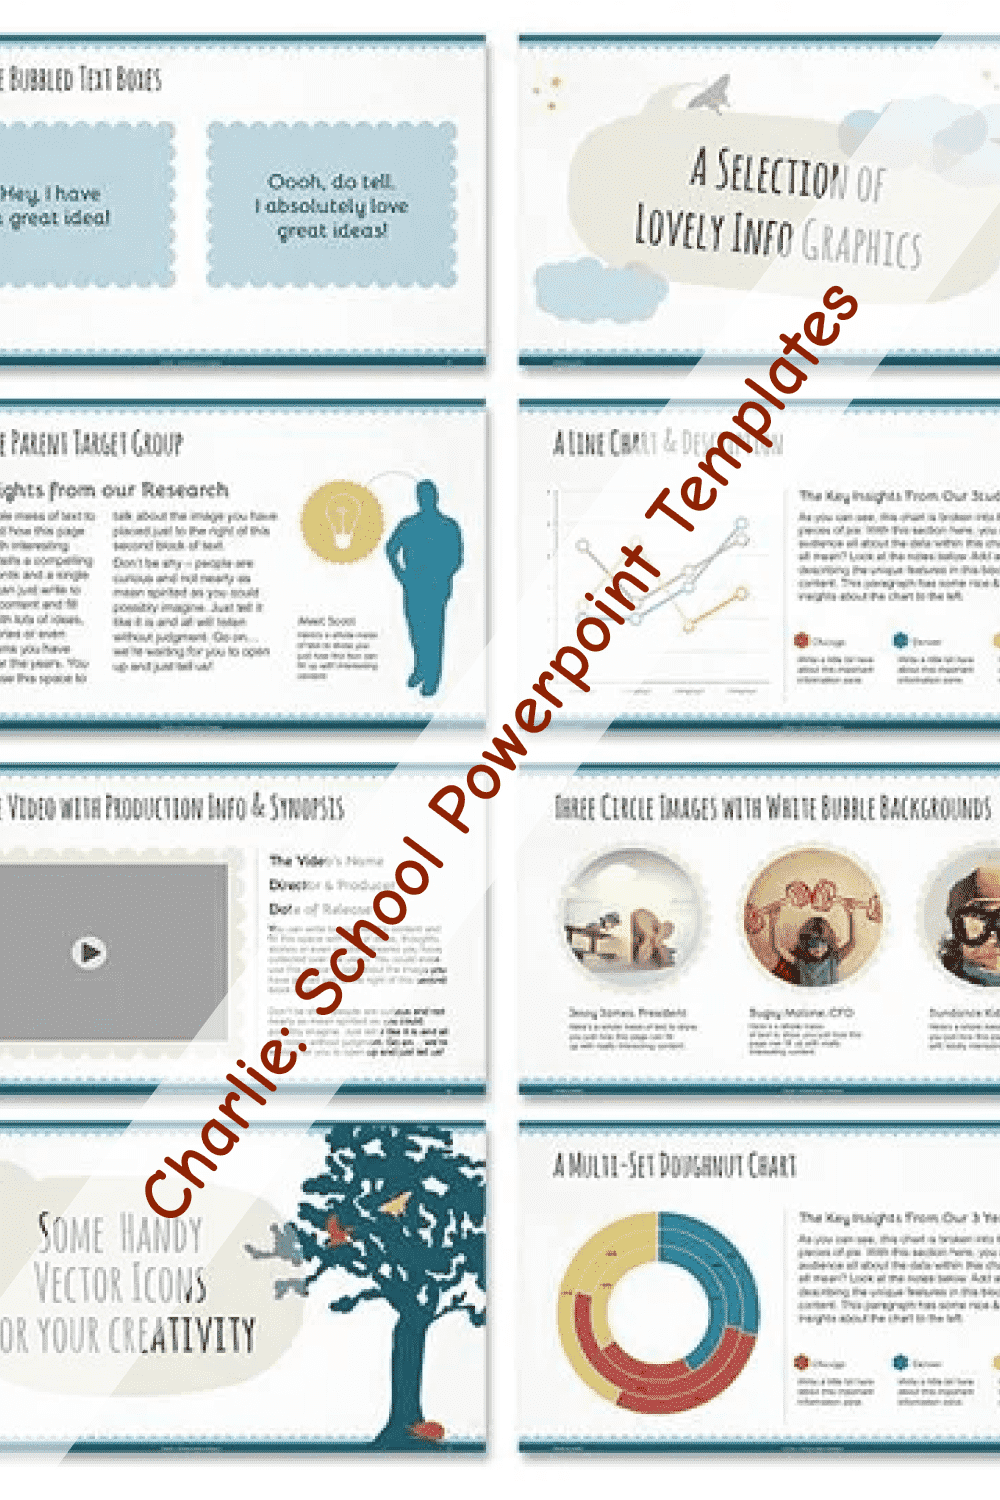 Charlie: School Powerpoint Templates - "A Selection Of Lovely Info Graphics".